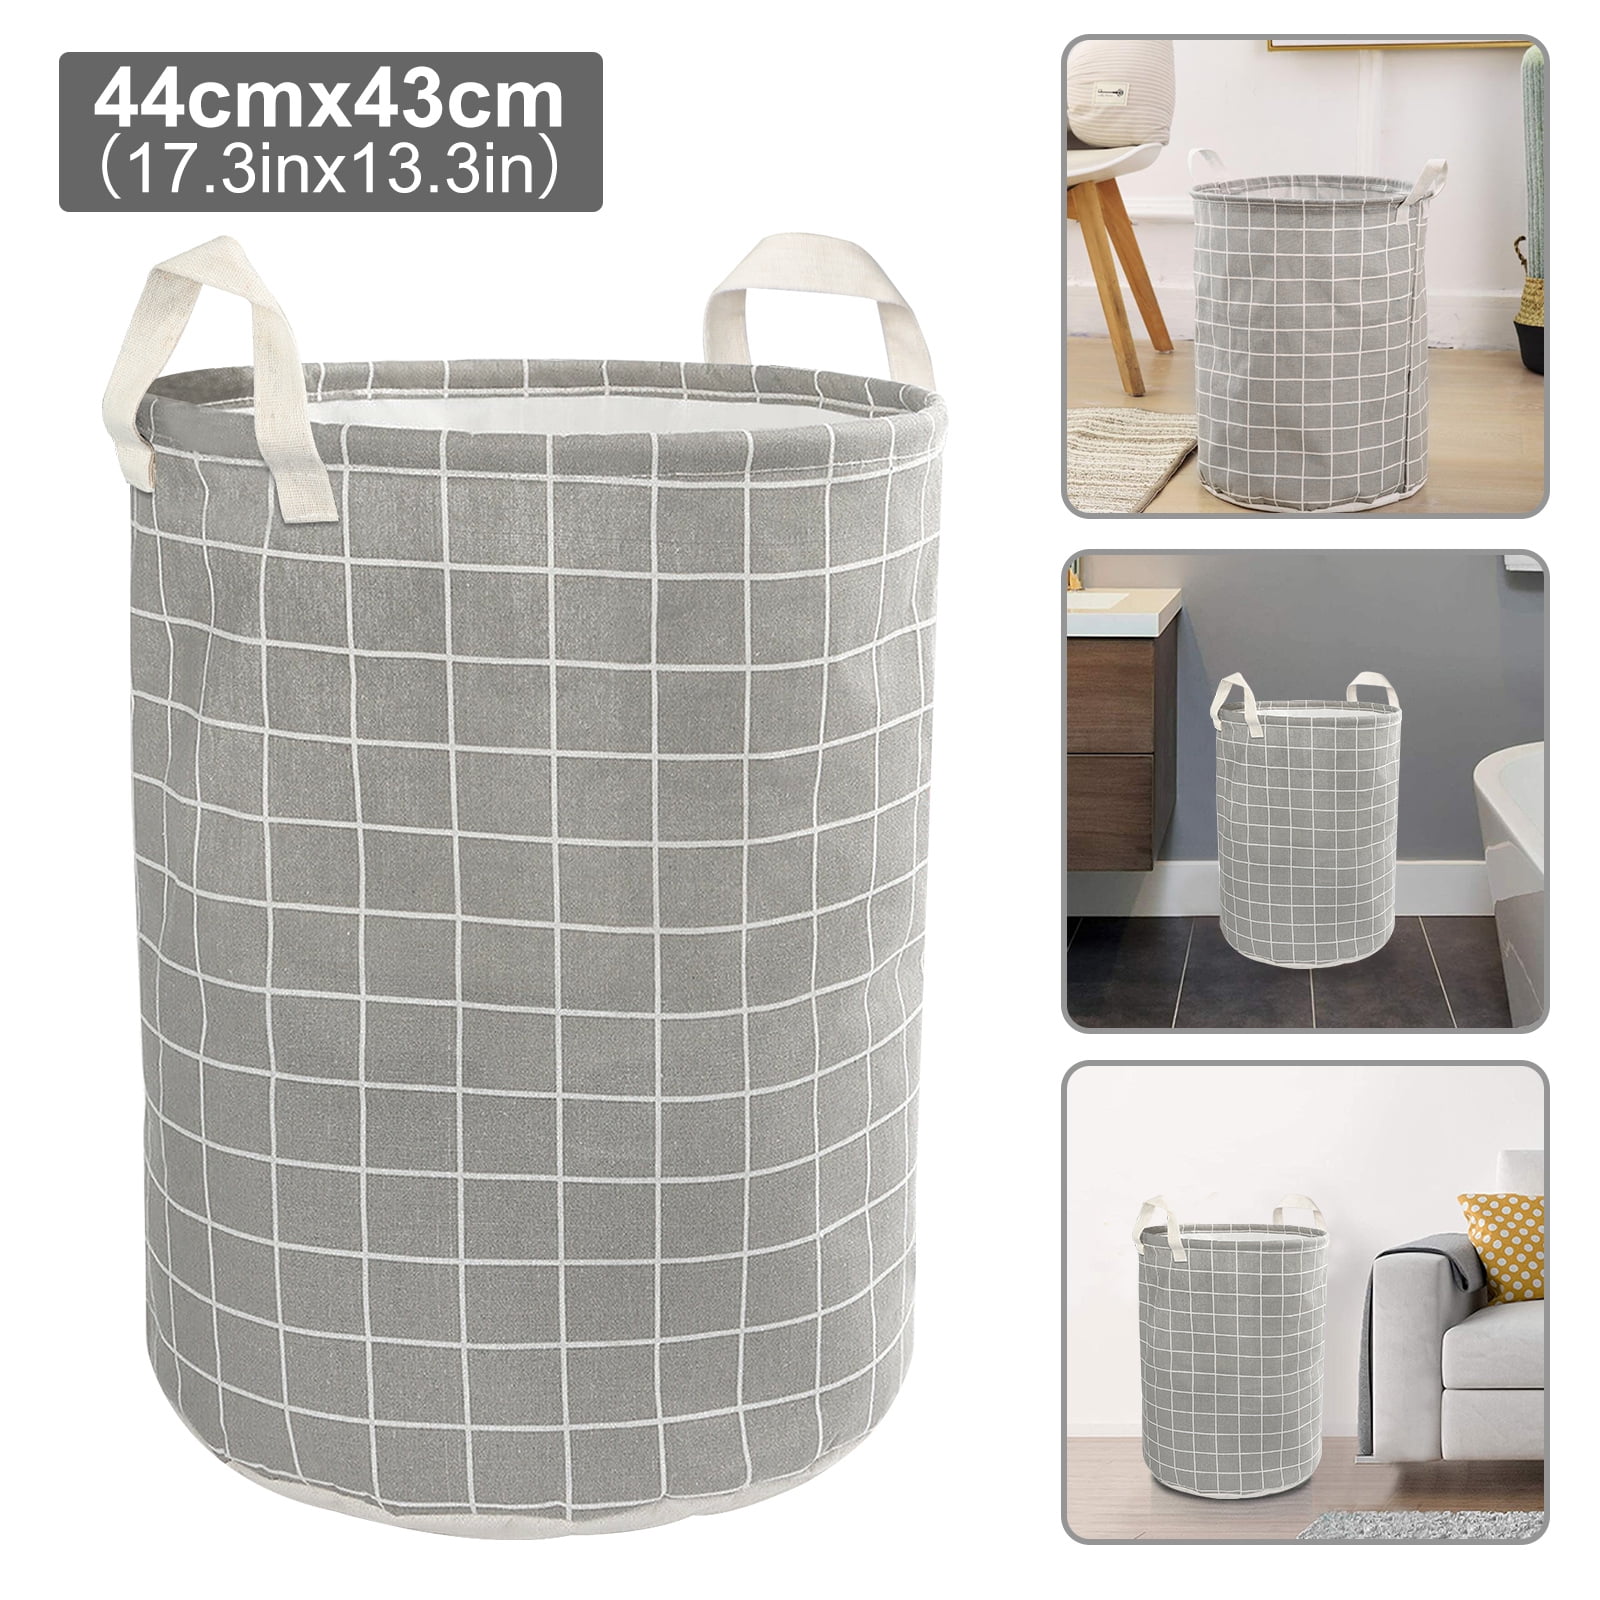 1*Foldable Laundry Basket Round Collapsible Clothes Toy Storage Bin Hamper BEST 